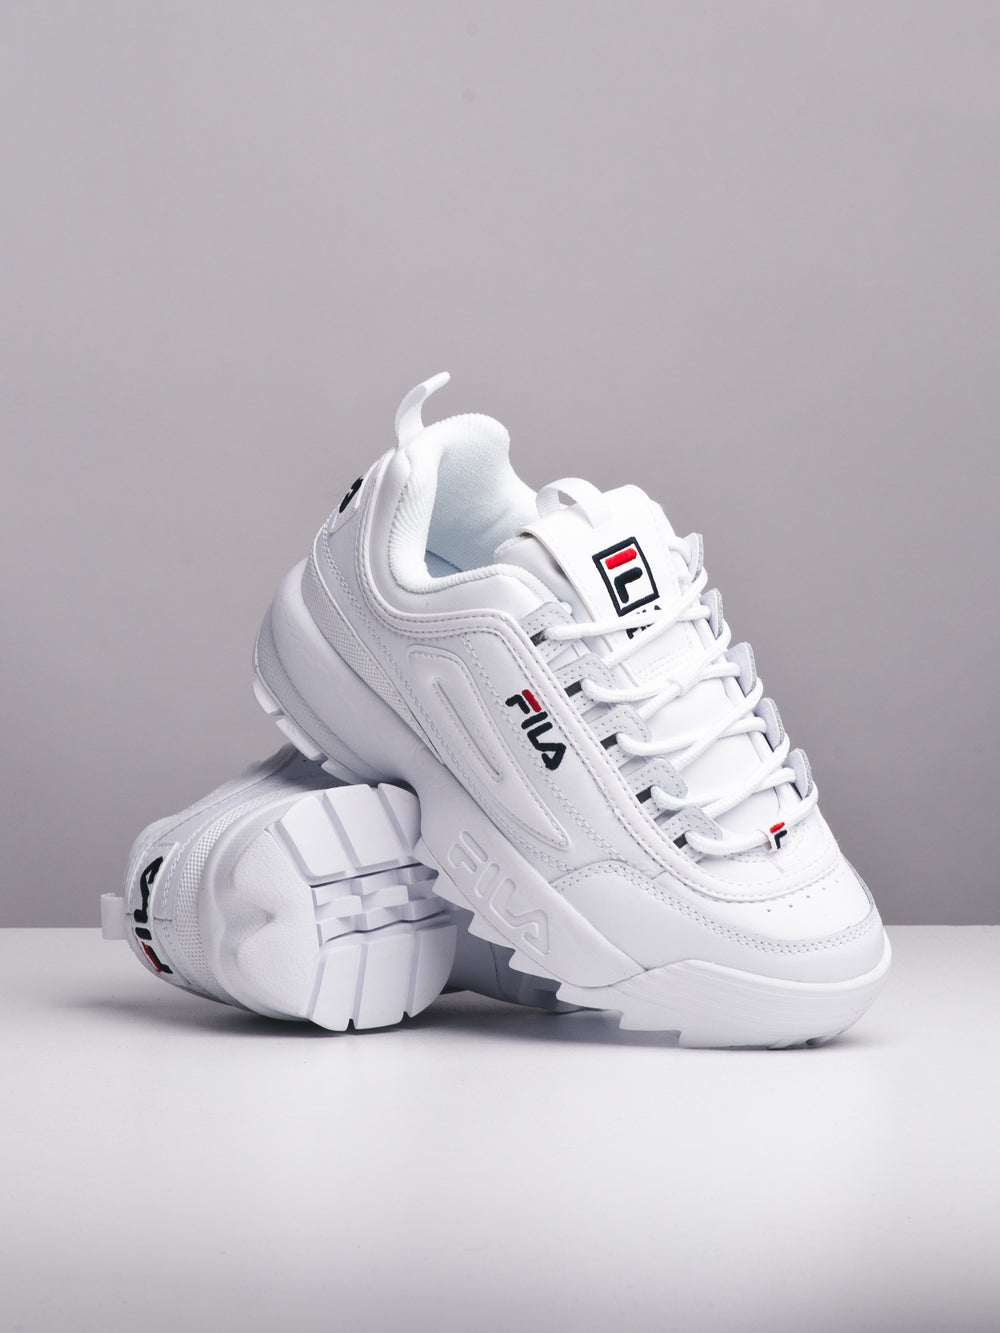 FILA Disruptor II Kid’s Premium Casual Shoes White Navy Red NEW 